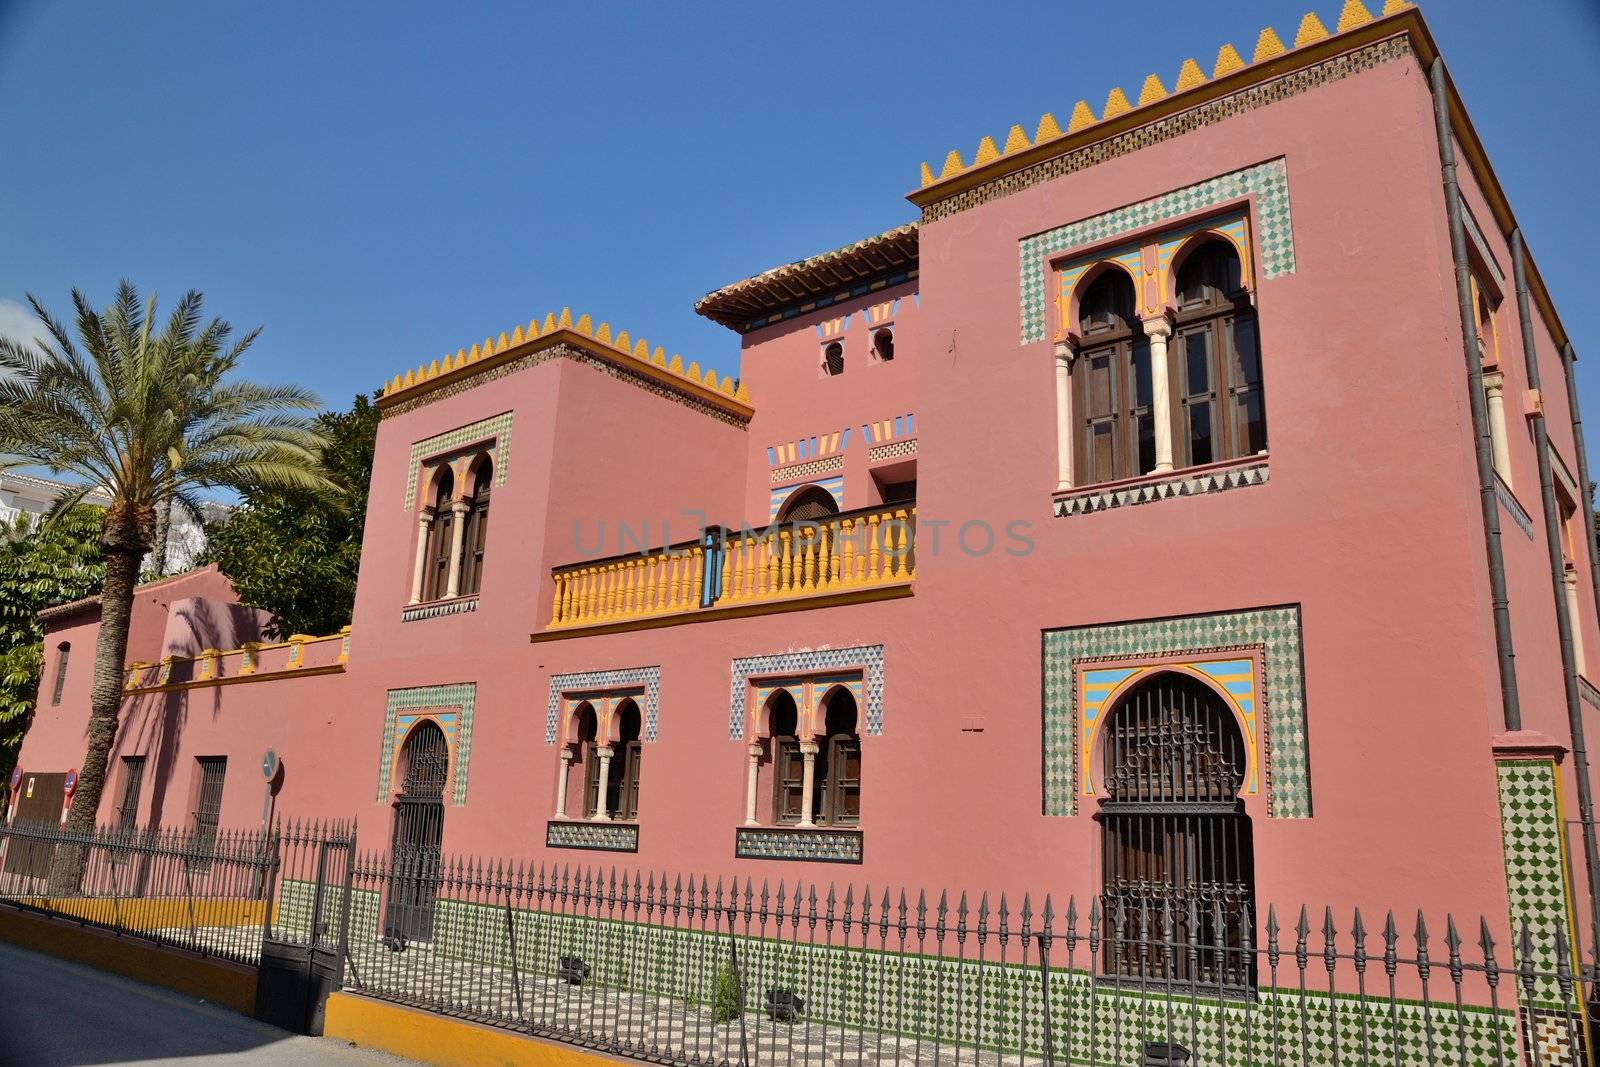 Spanish-style buildings in the town of Almunecar